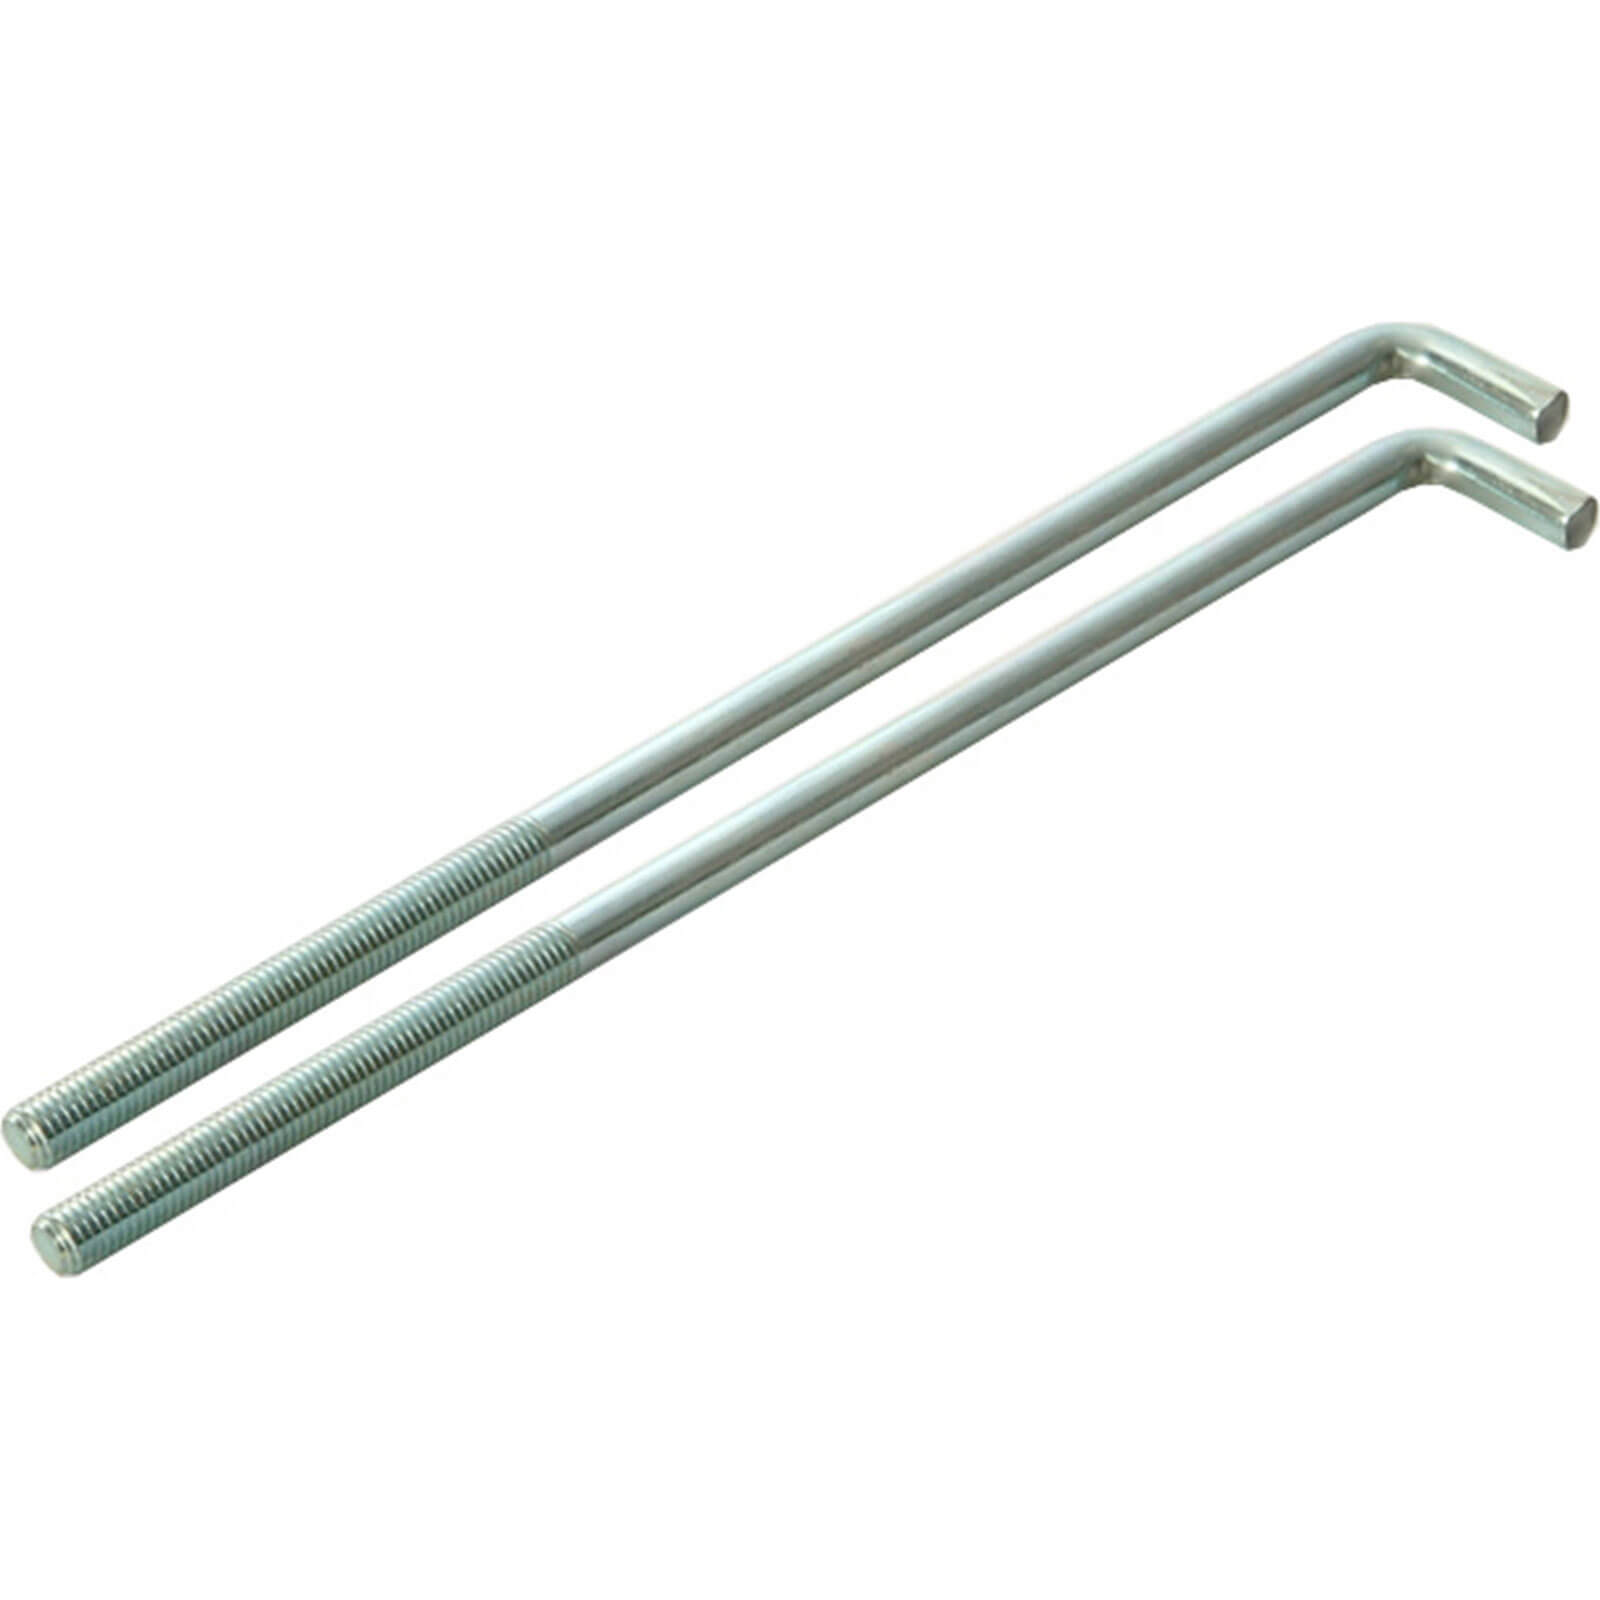 Image of Faithfull External Building Profile Bolts 460mm Pack of 2